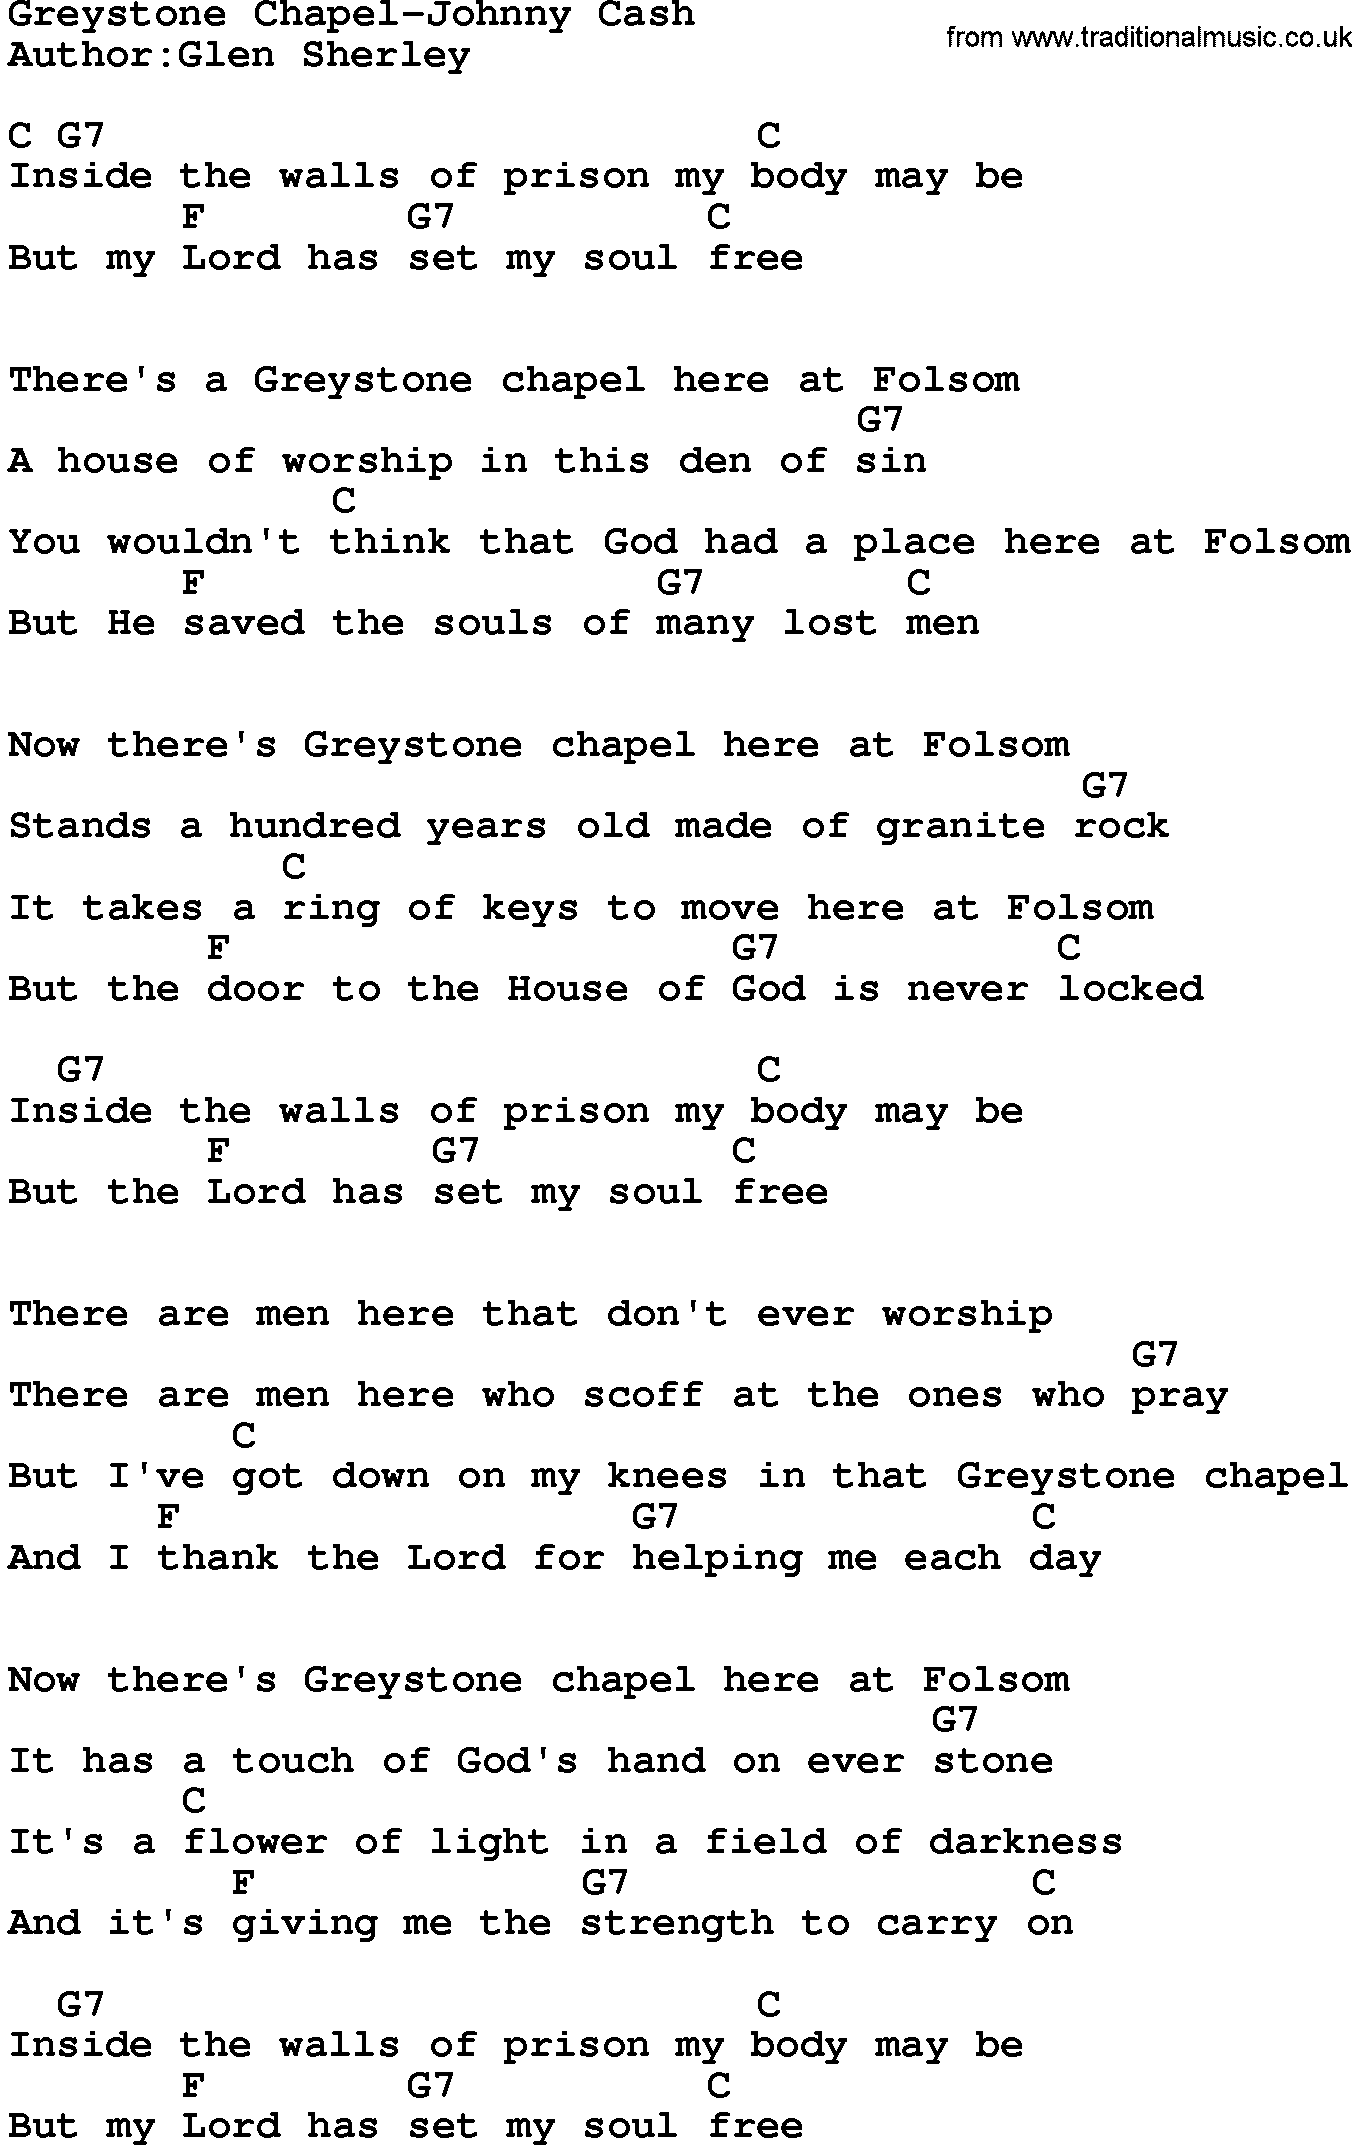 Country music song: Greystone Chapel-Johnny Cash lyrics and chords